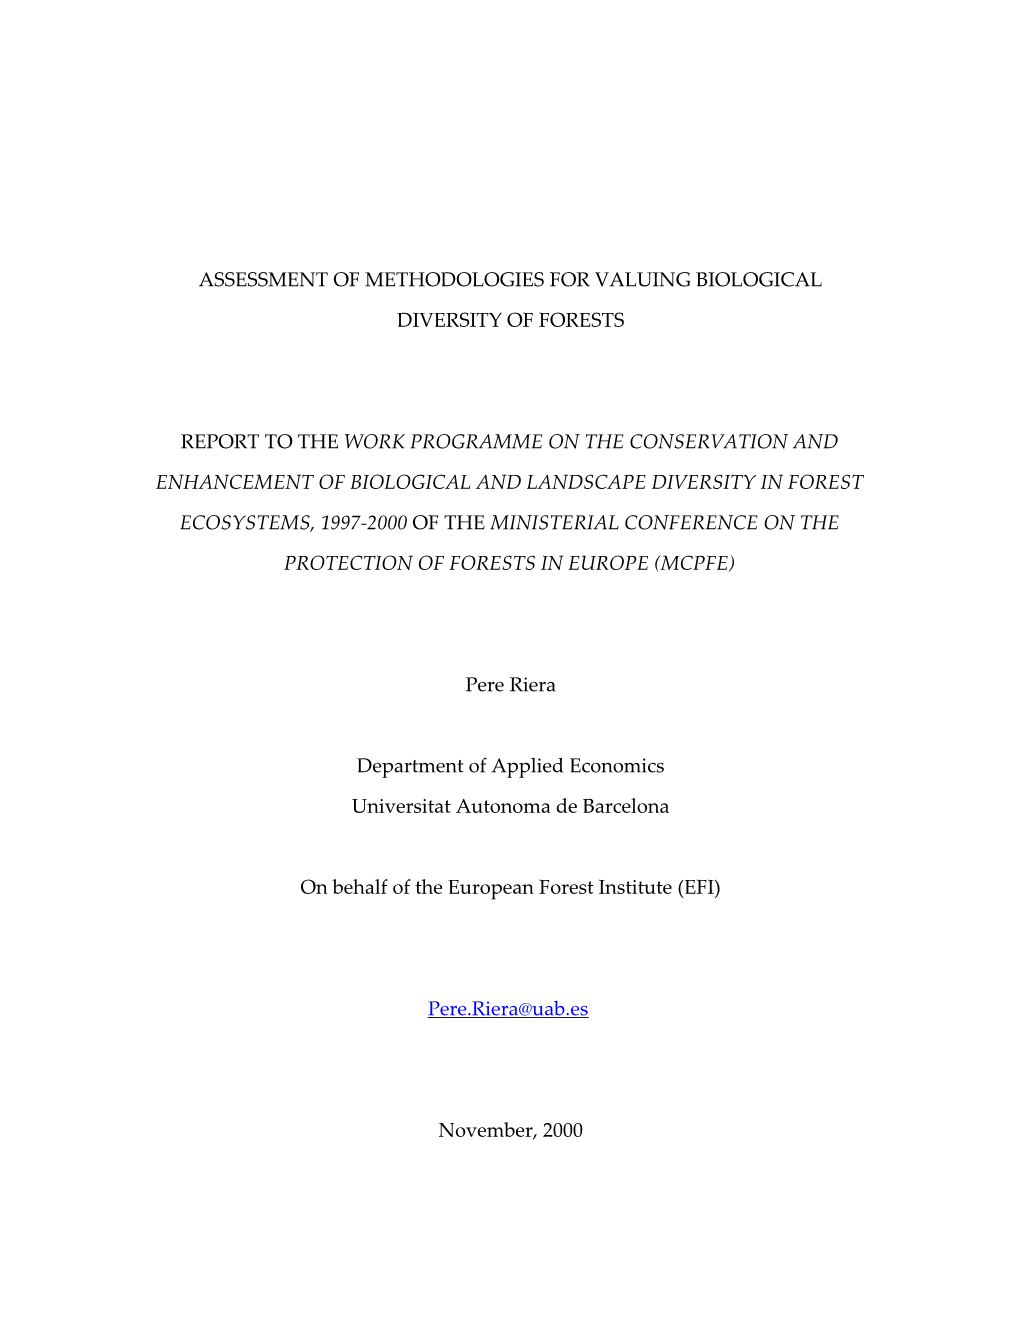 On the Valuation of Biological Diversity of Forests